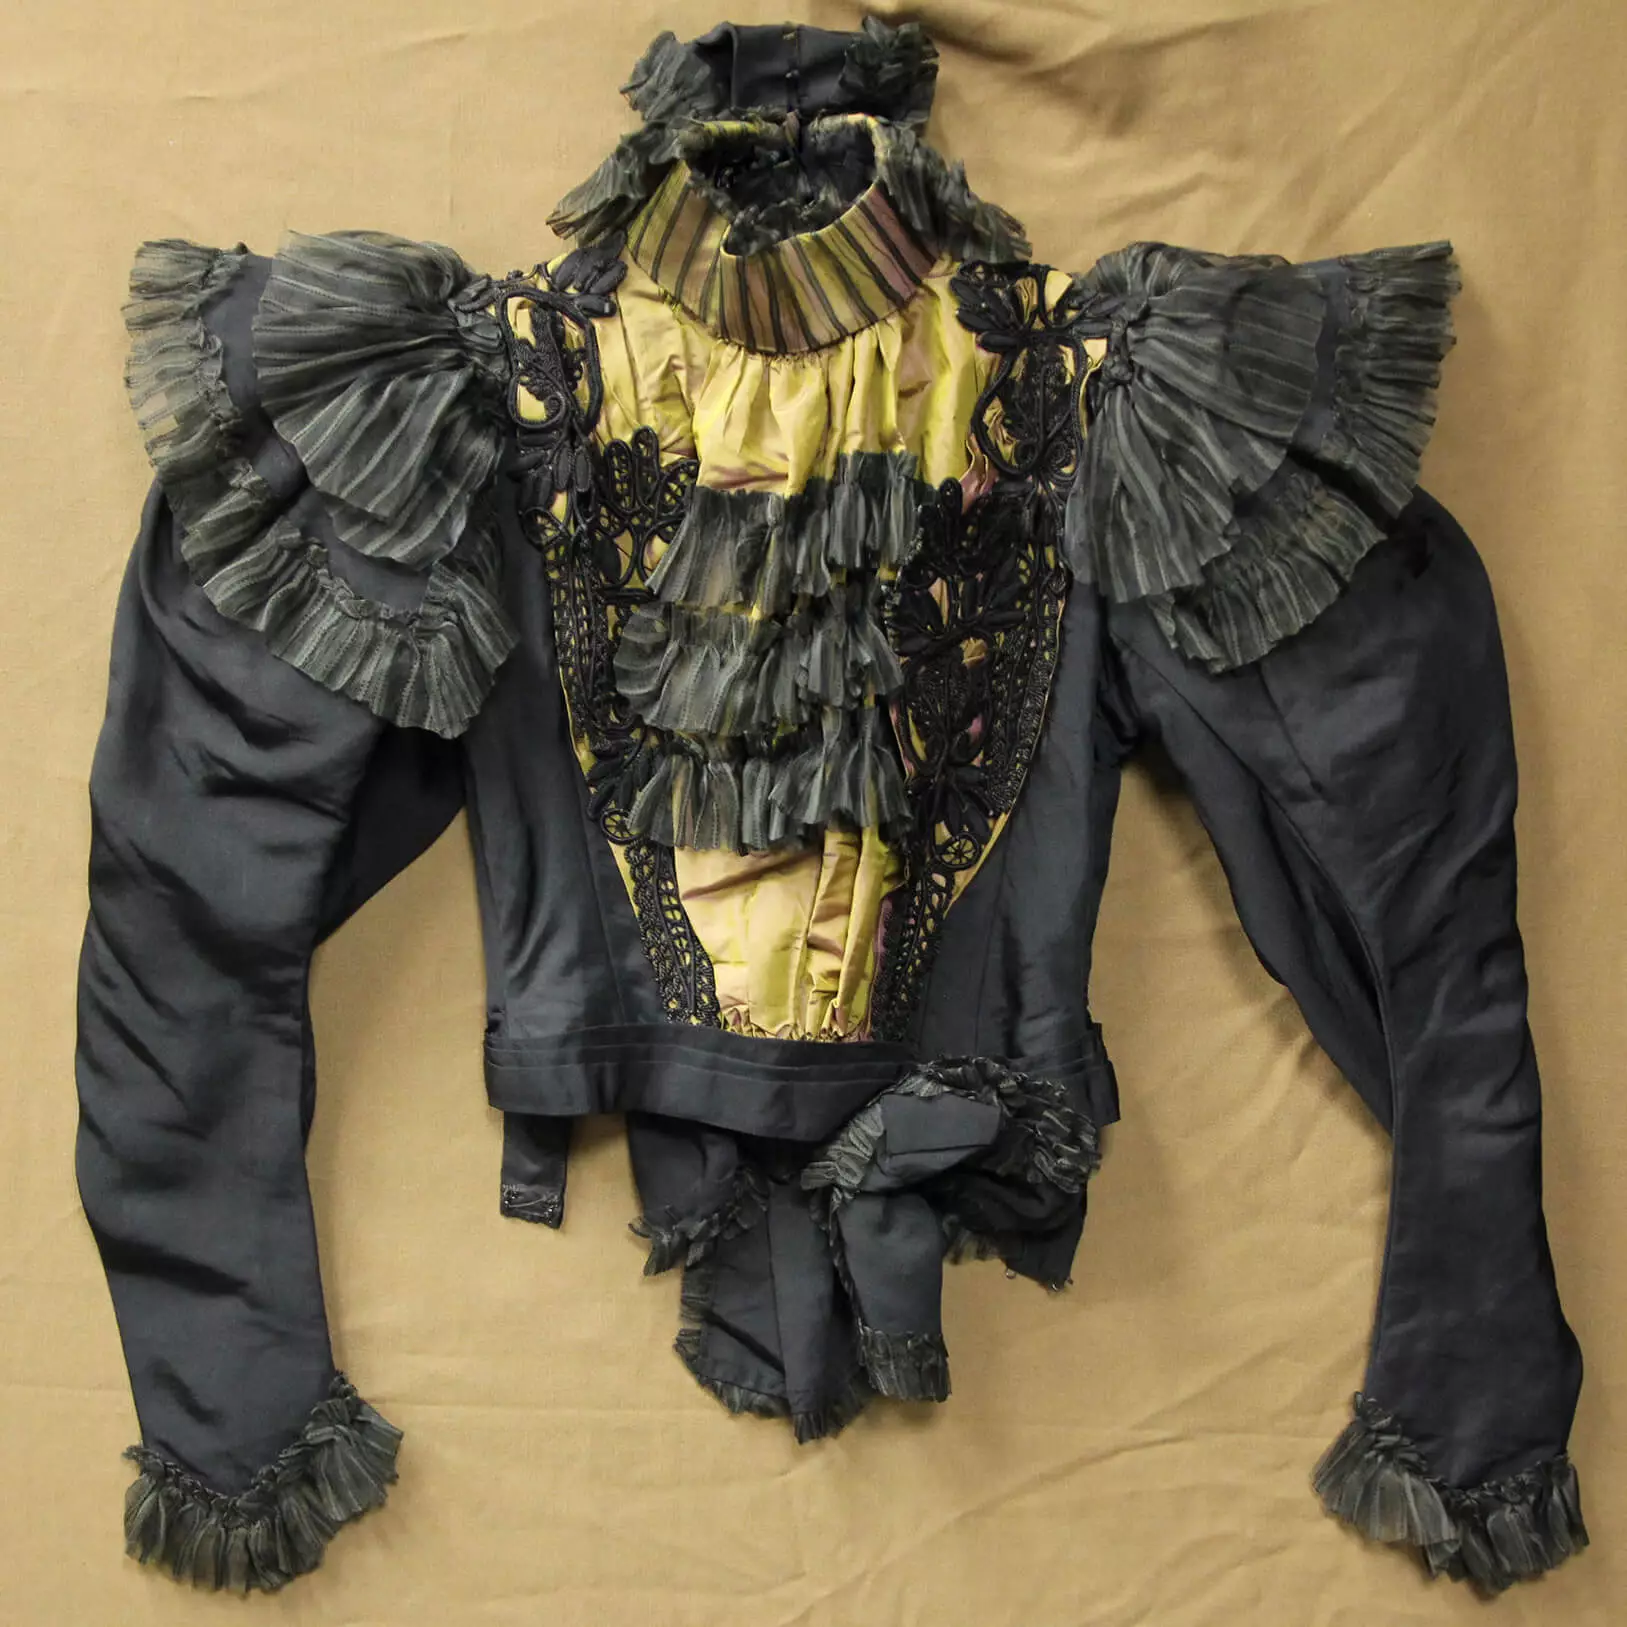 black silk bodice with beige or gold layer underneath black ruffles in the front.